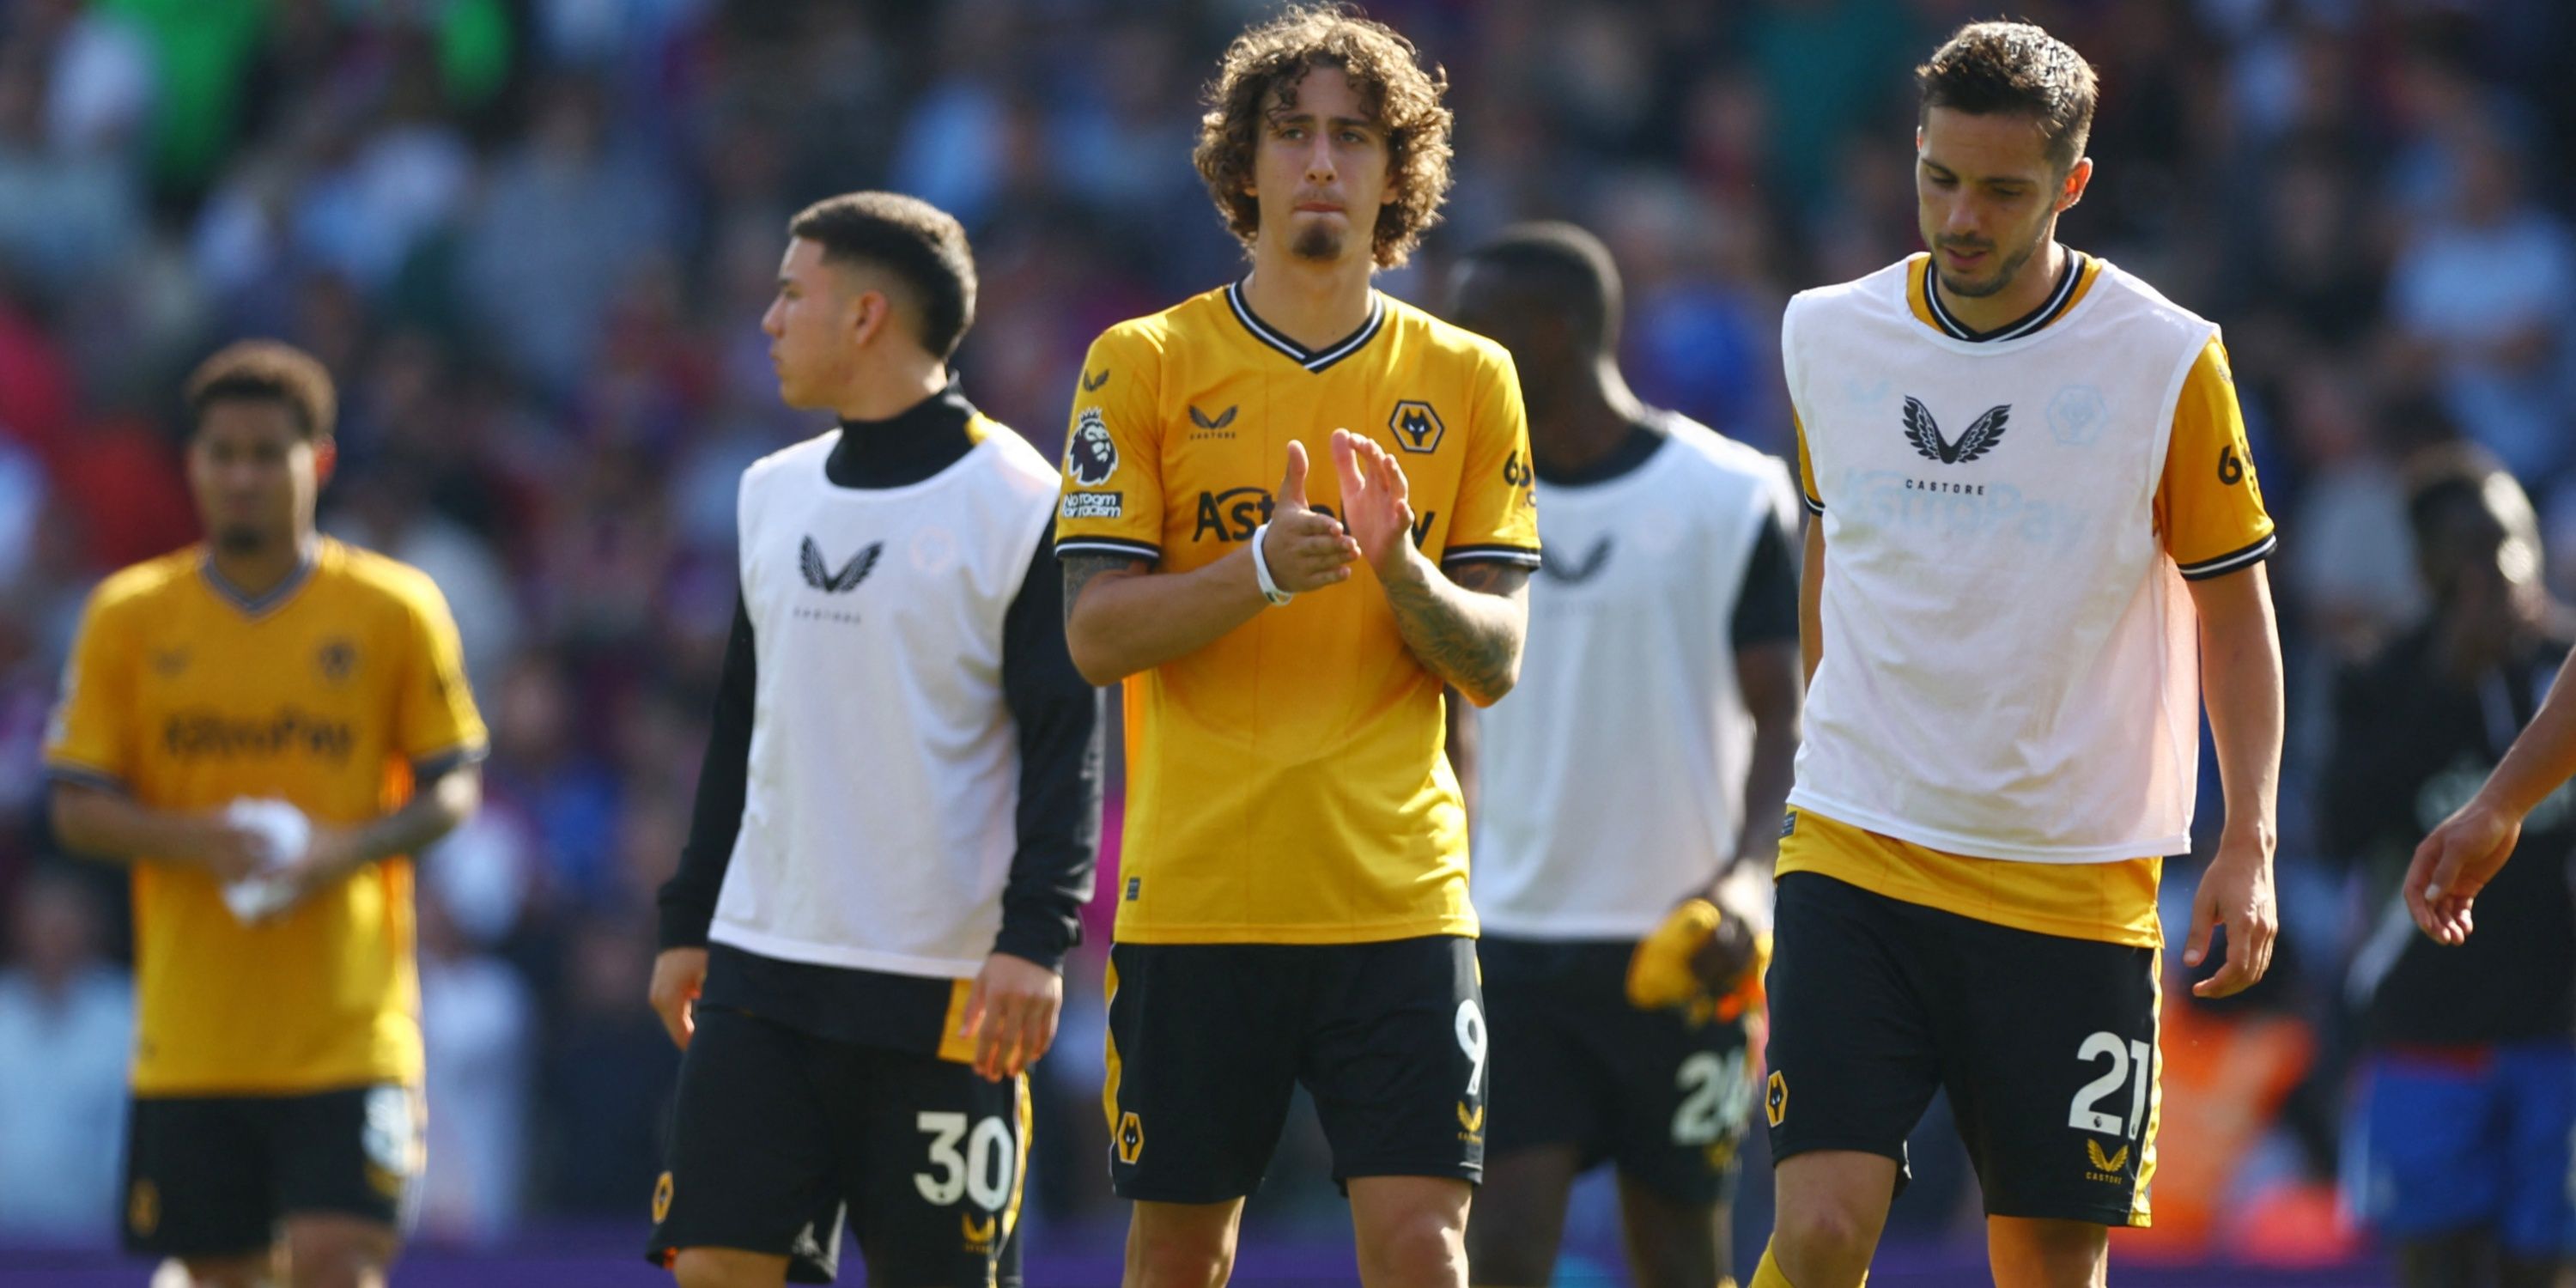 Wolves ‘will make heavy loss’ on Fabio Silva who has ‘got to move on’